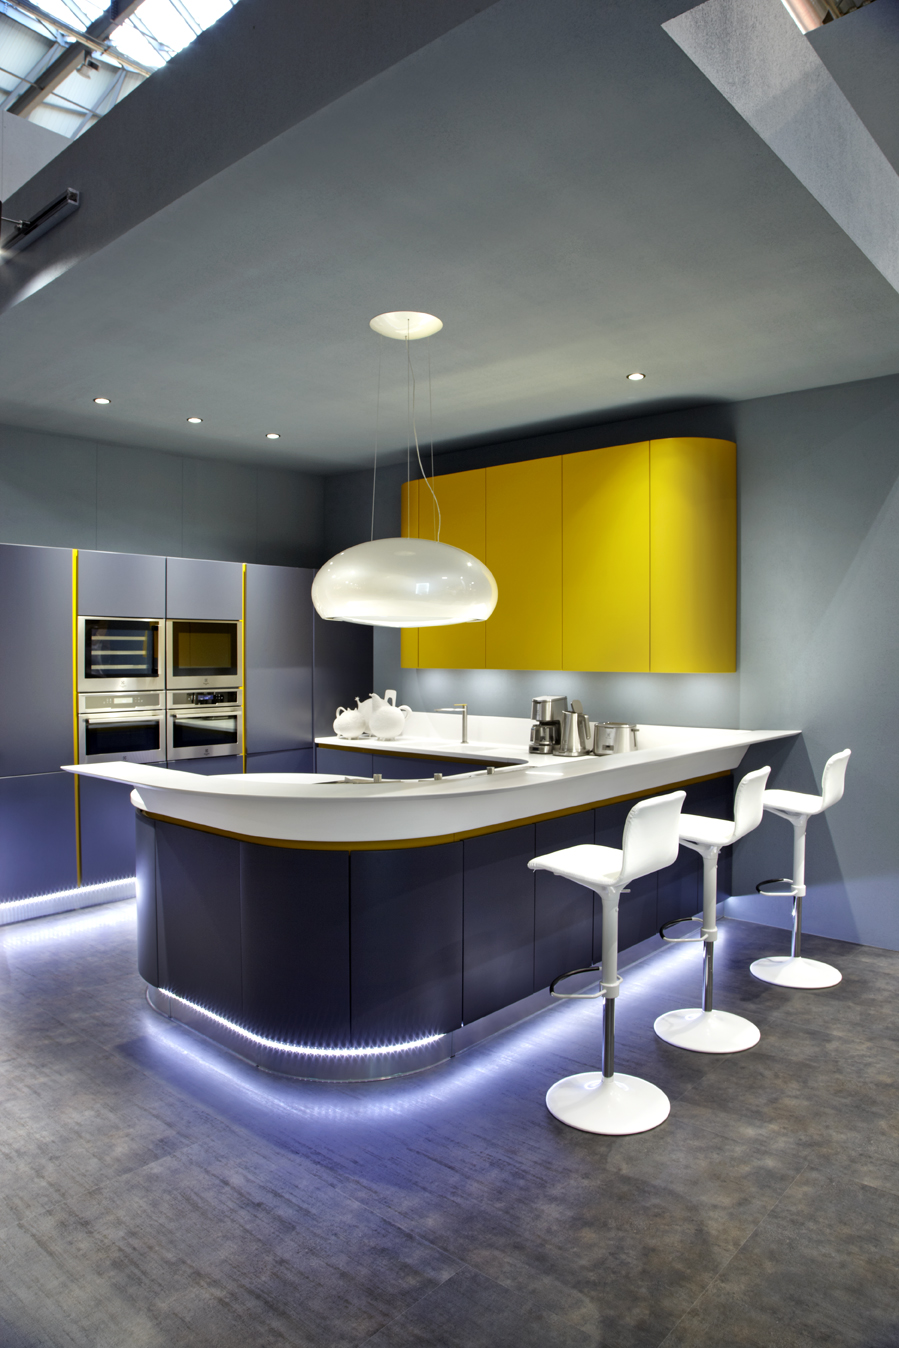 AR-TRE kitchen fabricated by Union, exhibited at Milan Furniture Fair 2014